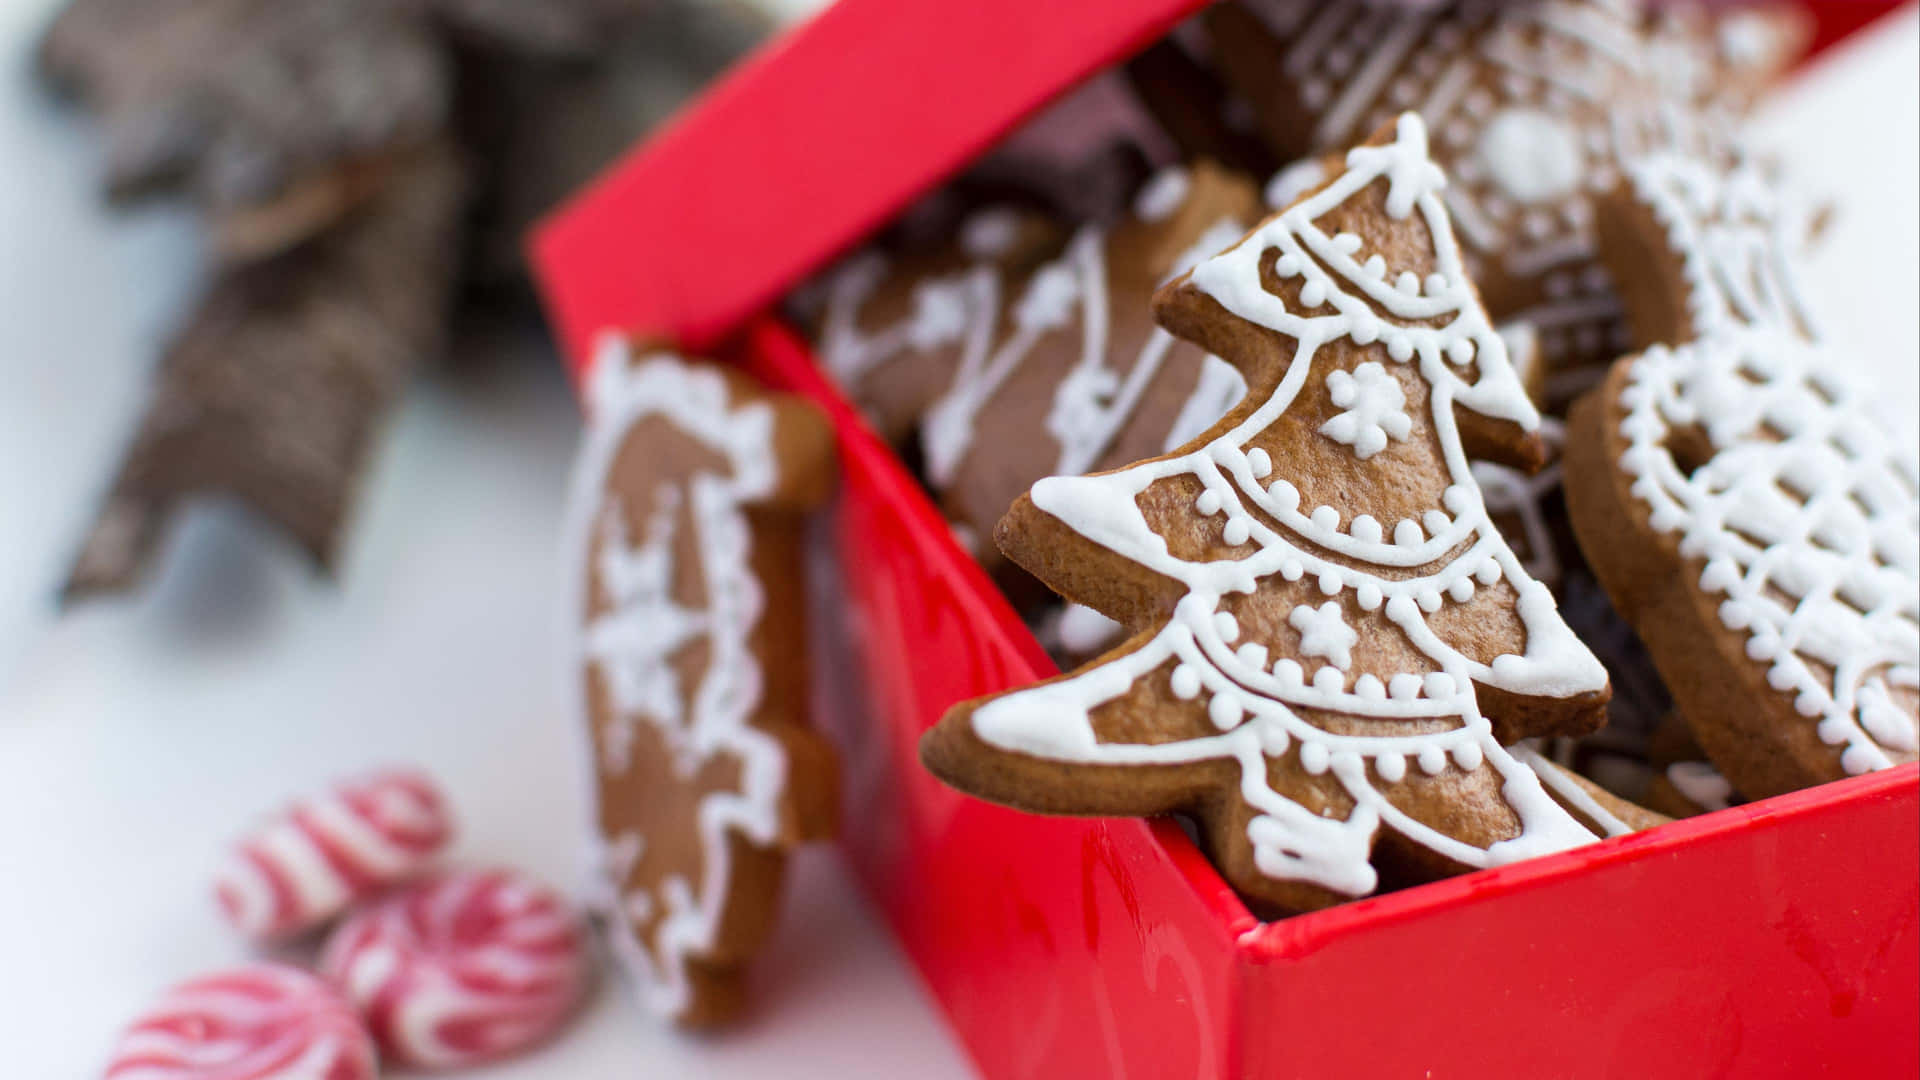 Festive Gingerbread Treats on a Wooden Table